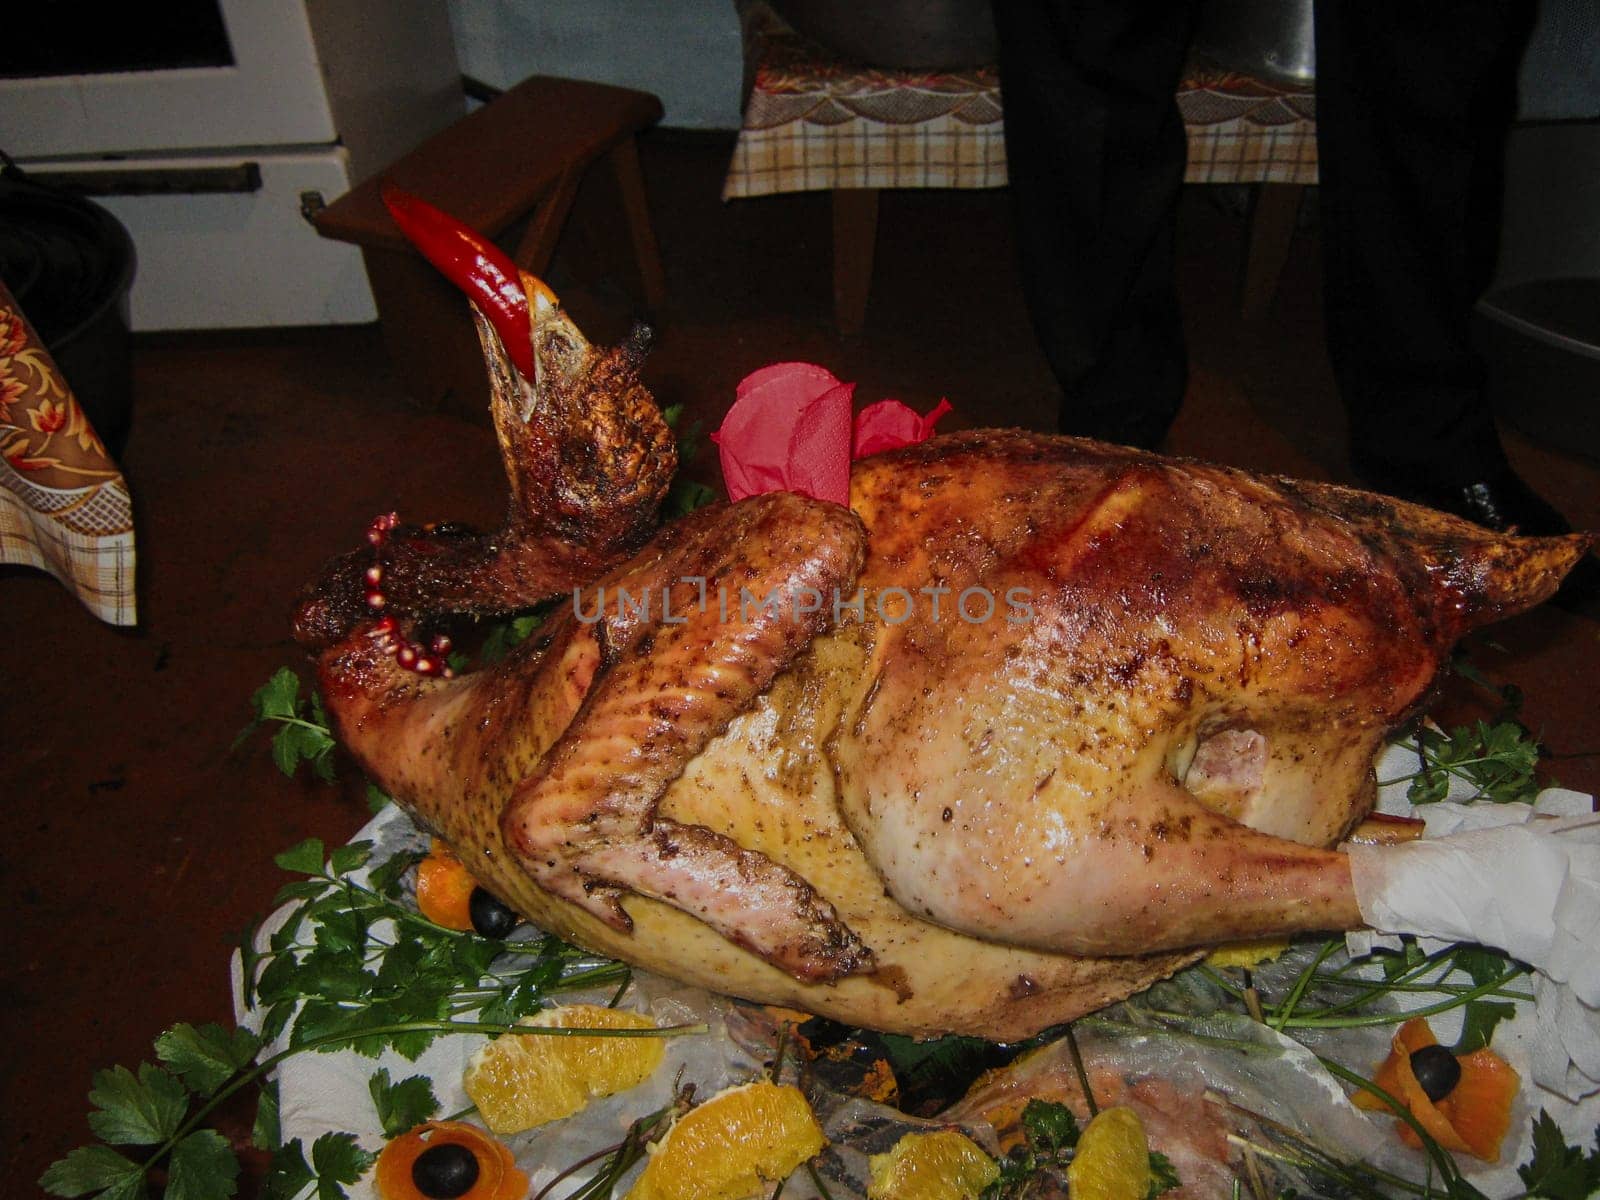 Beautifully decorated turkey with red pepper in its beak.